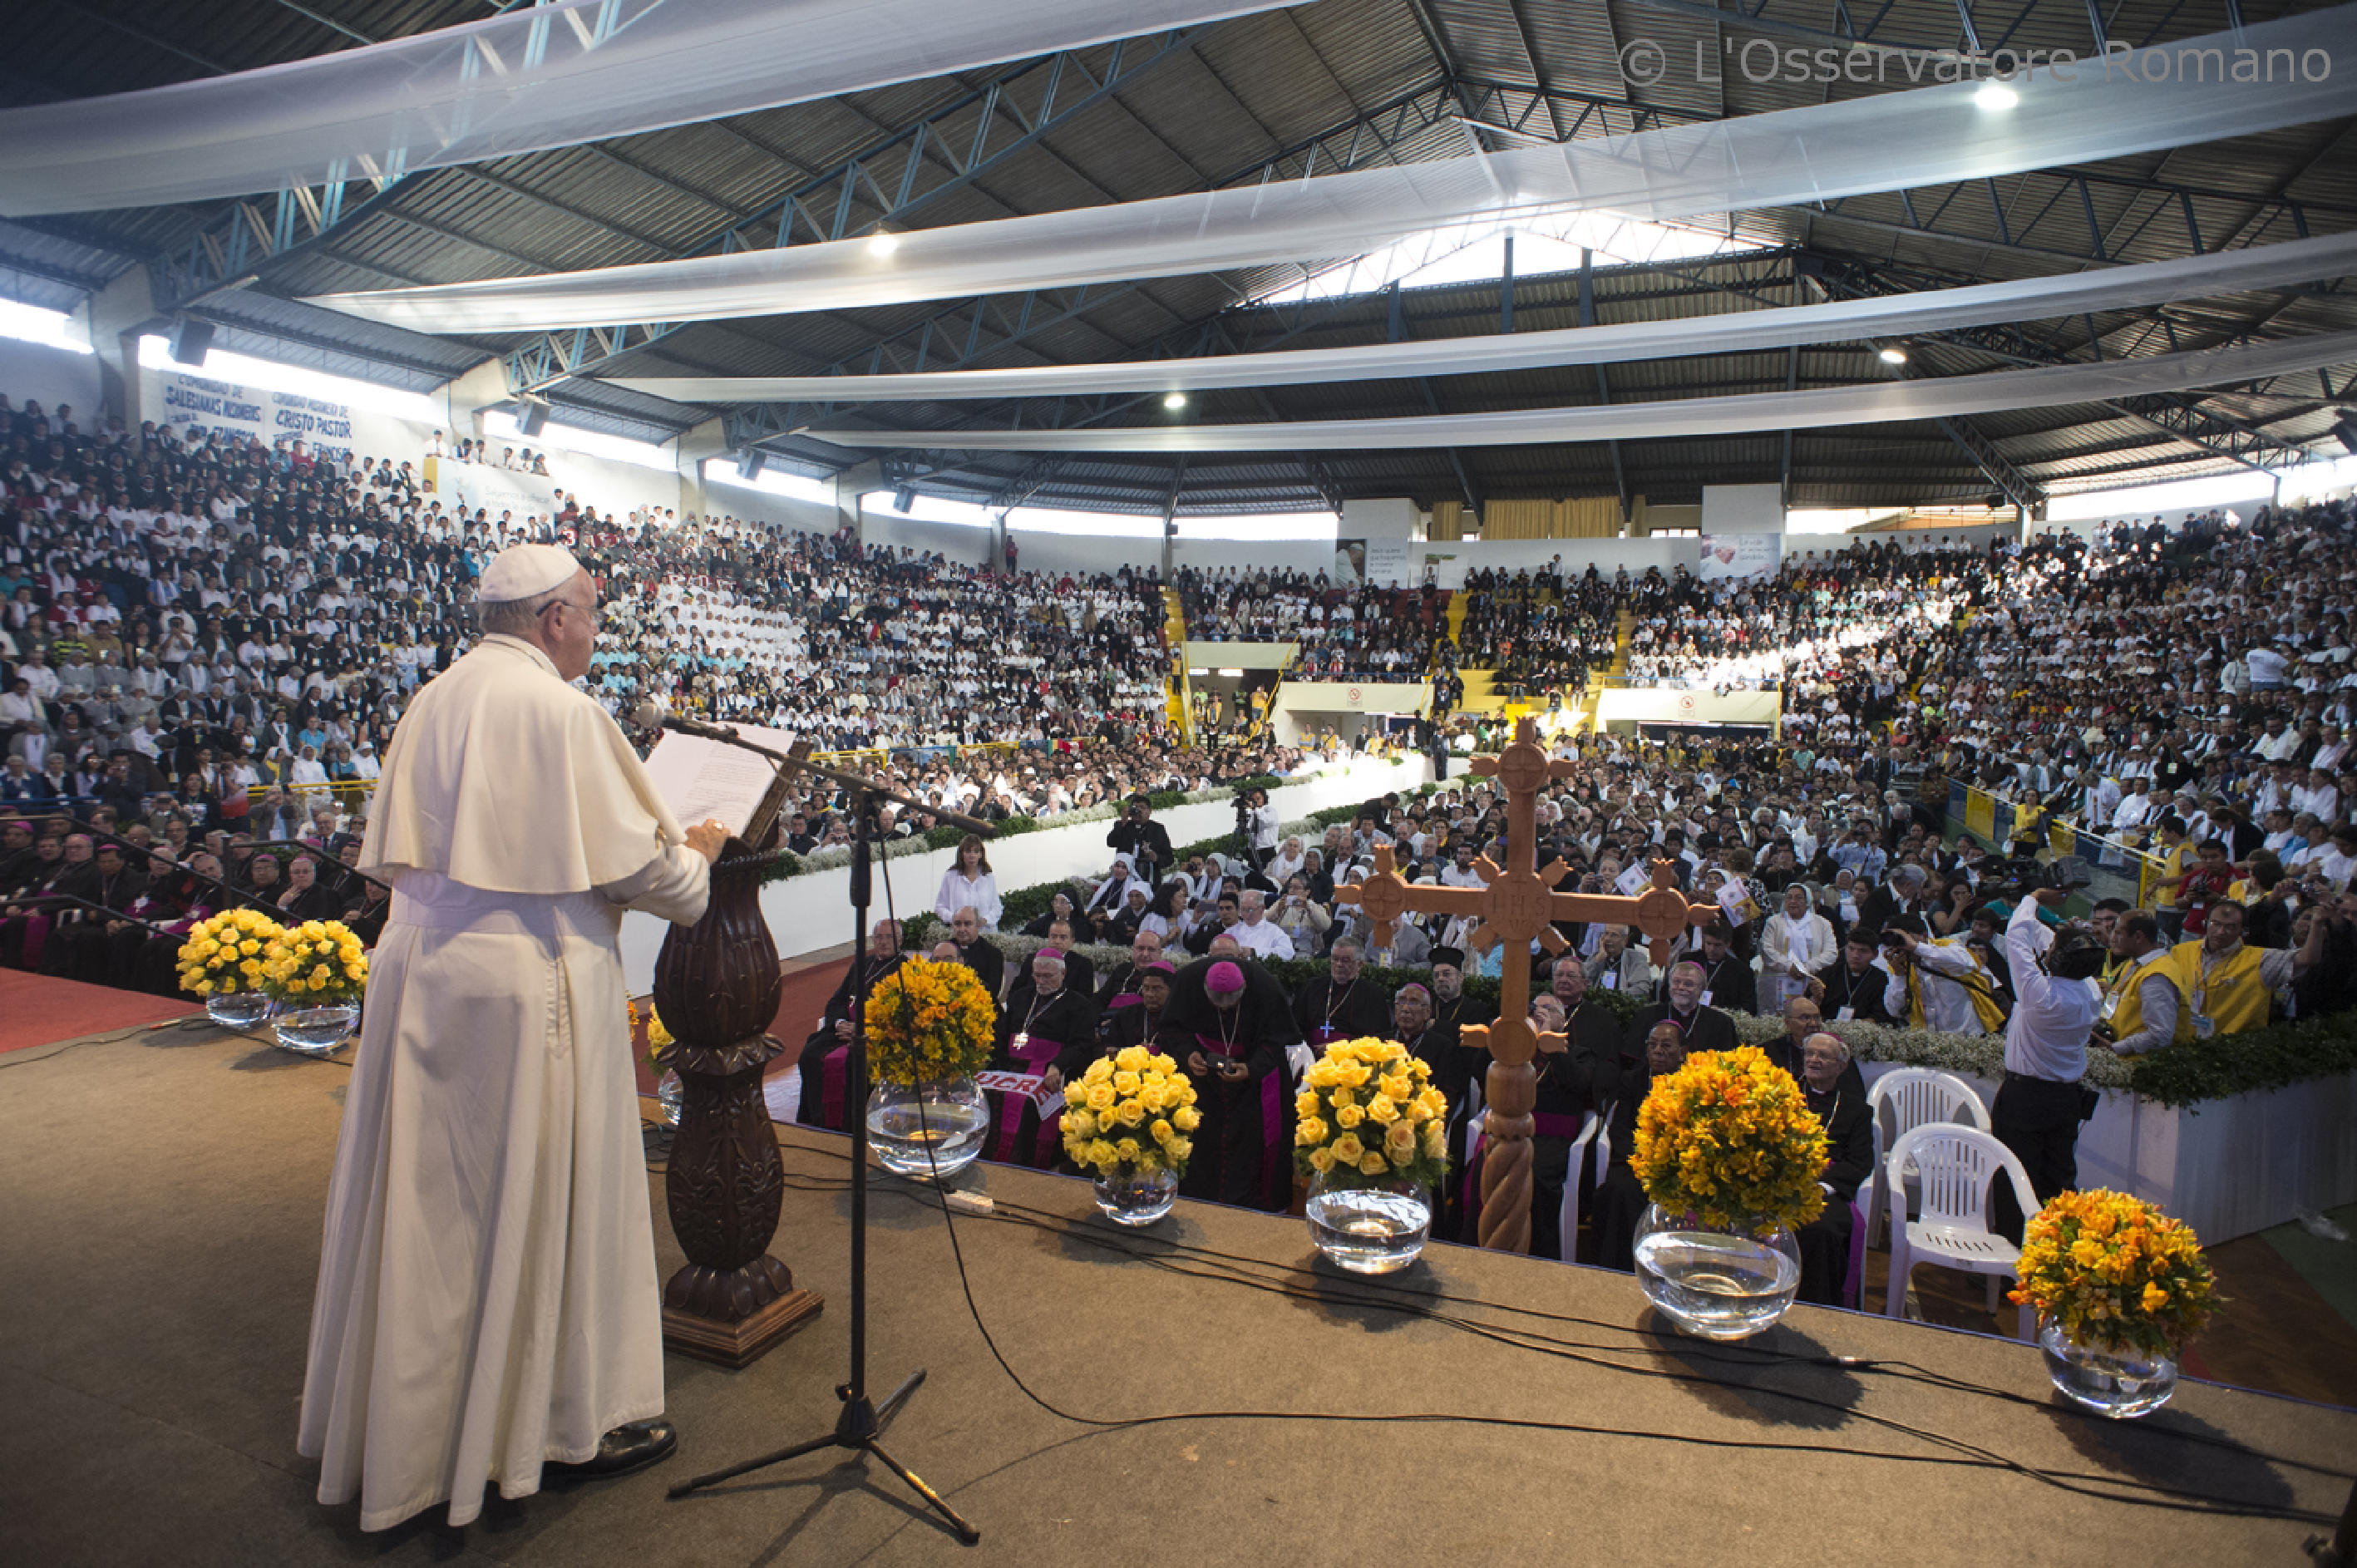 Pope Francis at the 2nd World Meeting of Popular Movements